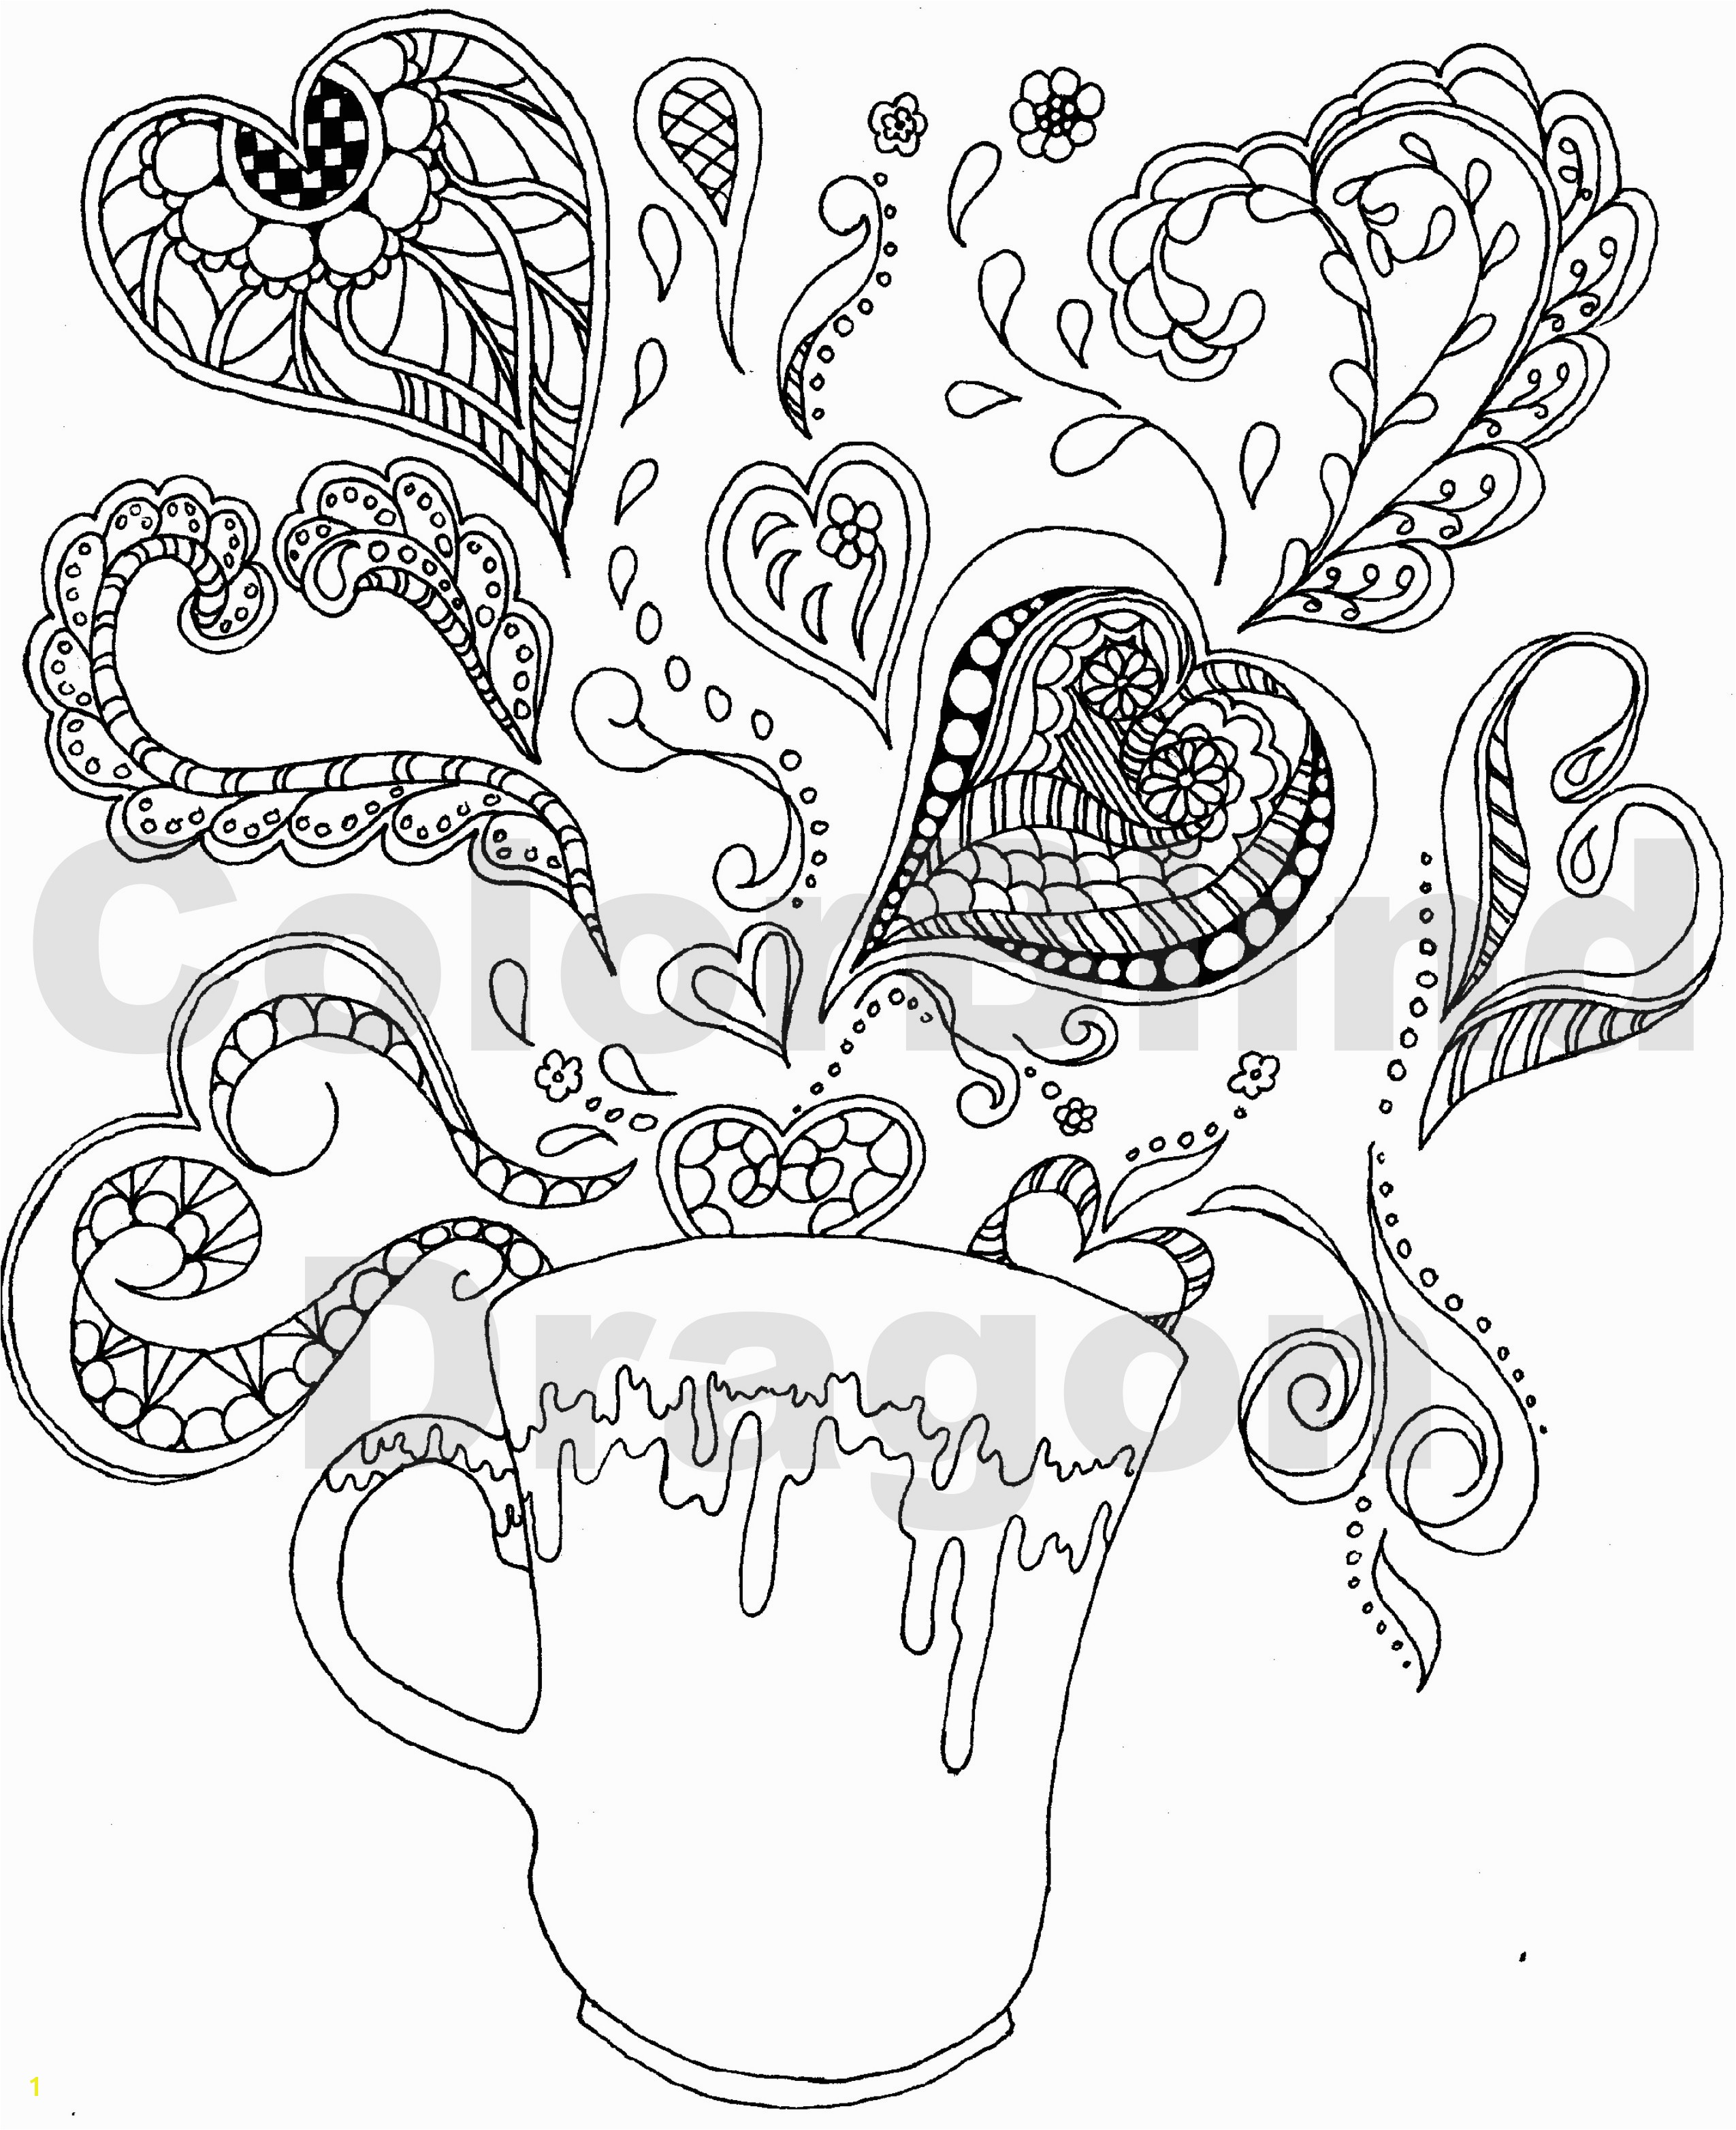 Coloring Pages Hearts with Ribbons Unique Awesome Coloring Page for Adult Od Kids Simple Floral Heart with Ruva